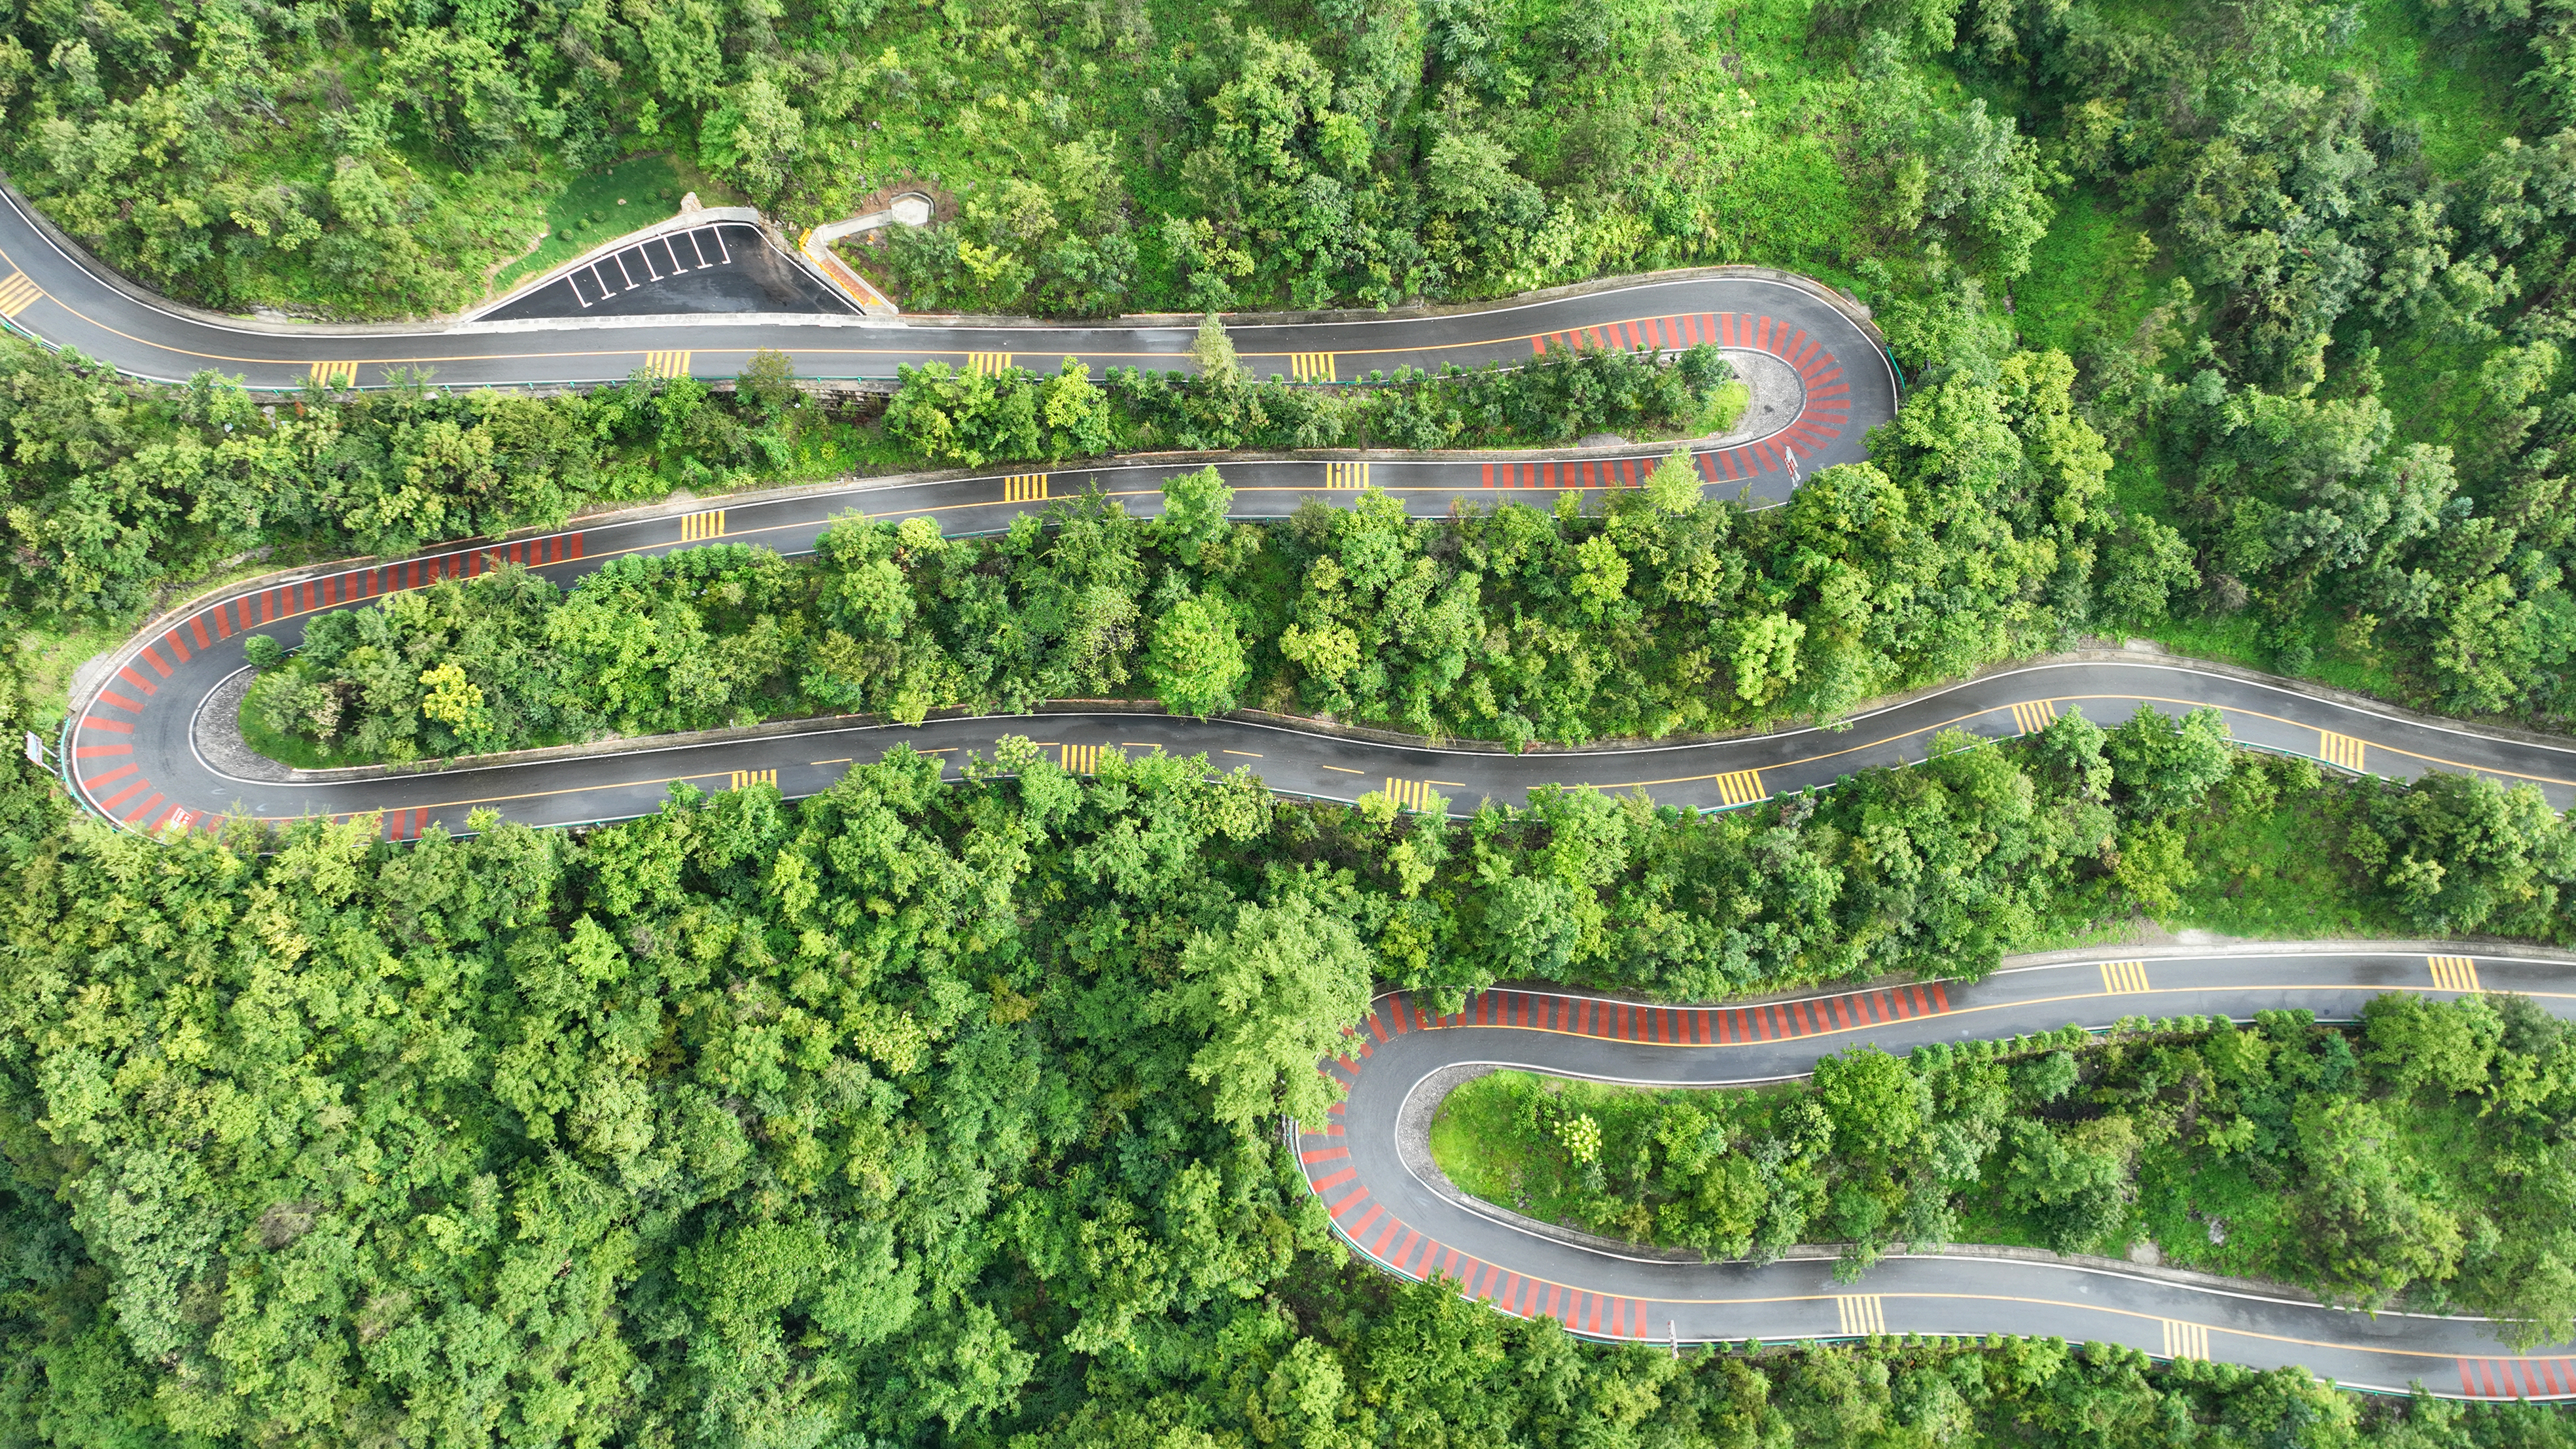 Winding road with hairpin bends in Hubei becomes top scenic spot